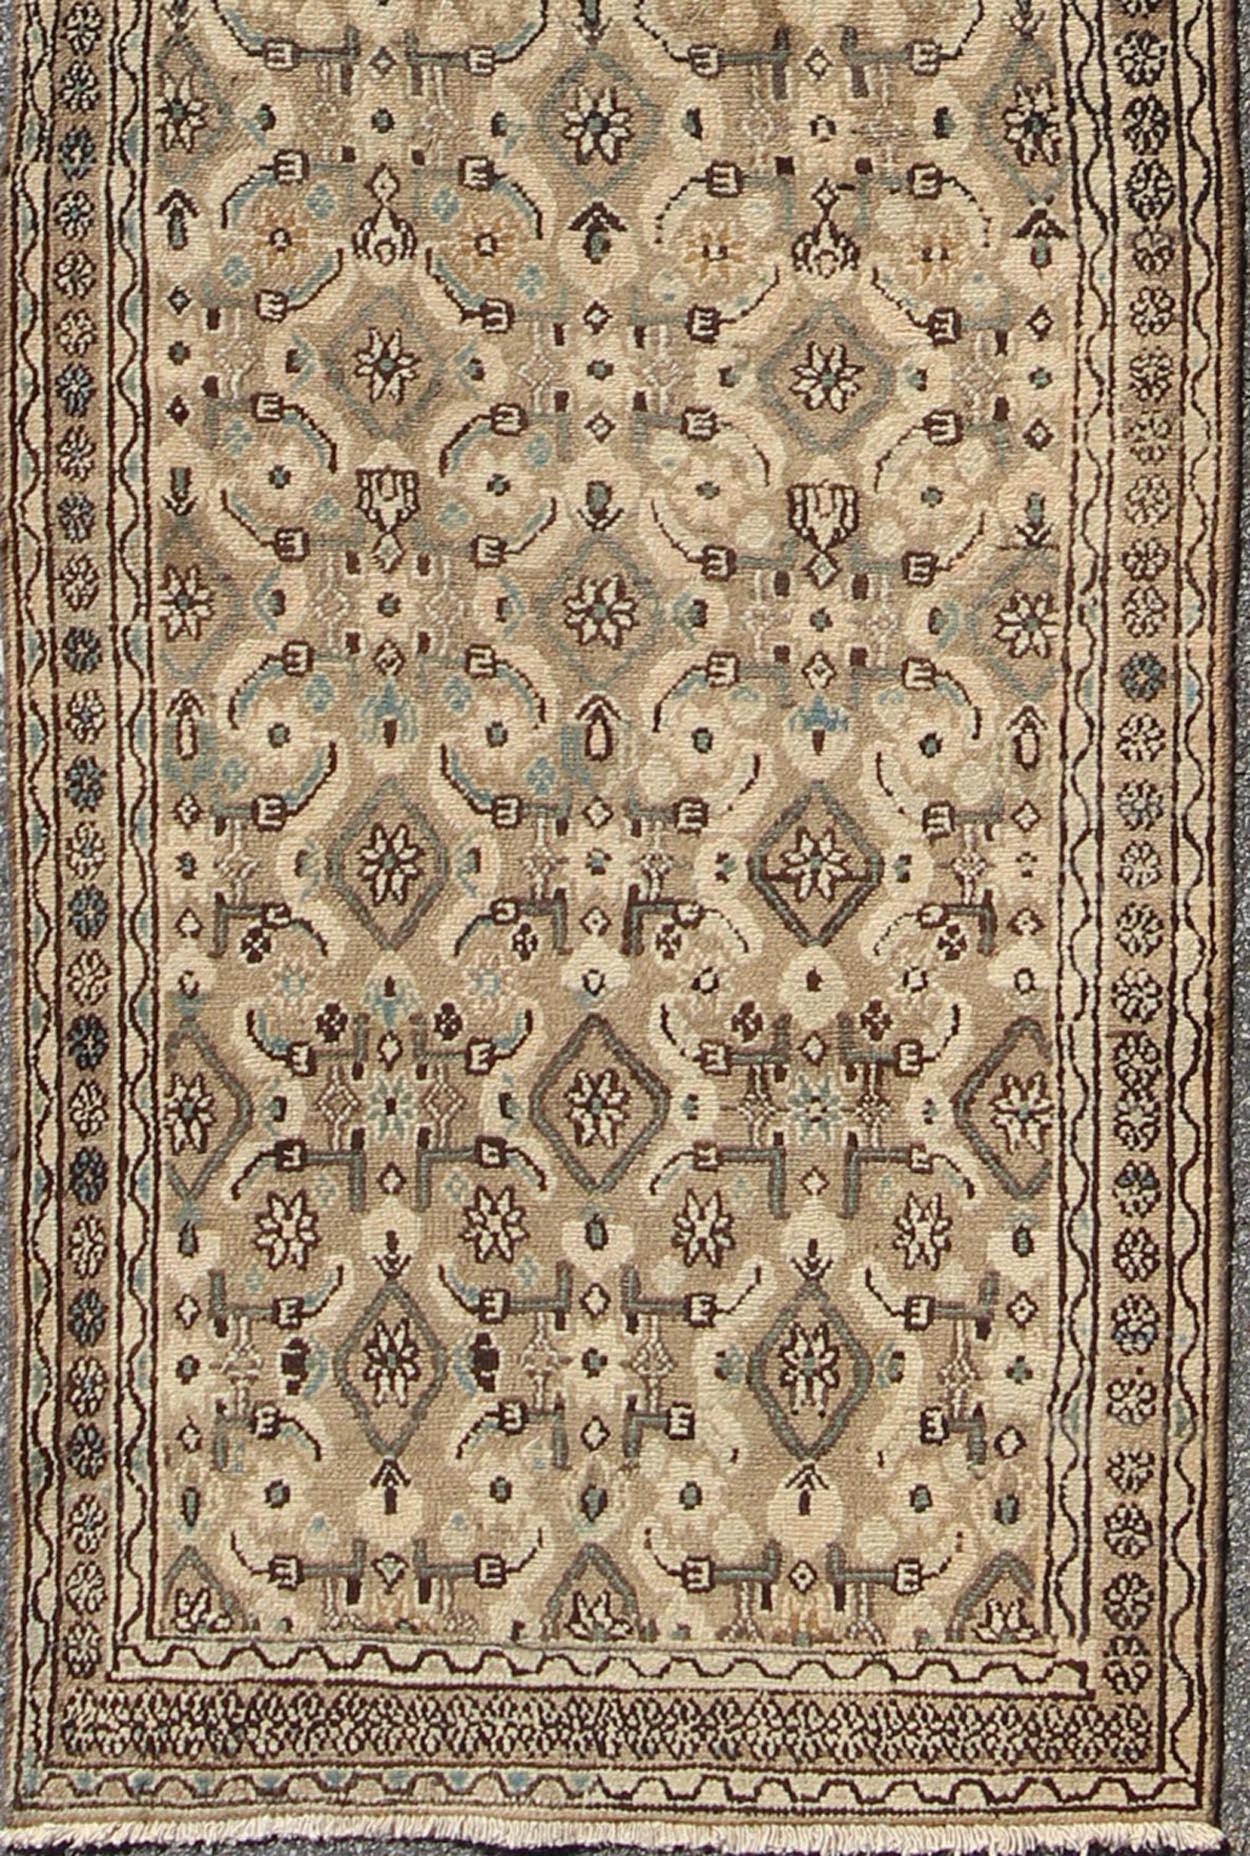 Antique all-over geometric design Hamadan runner in neutral tones of taupe, brown, gray, with a pop of light blue rug H-102-12, country of origin / type: Hamadan, circa 1930
This antique Hamadan runner features a Classic Herati design in warm earth